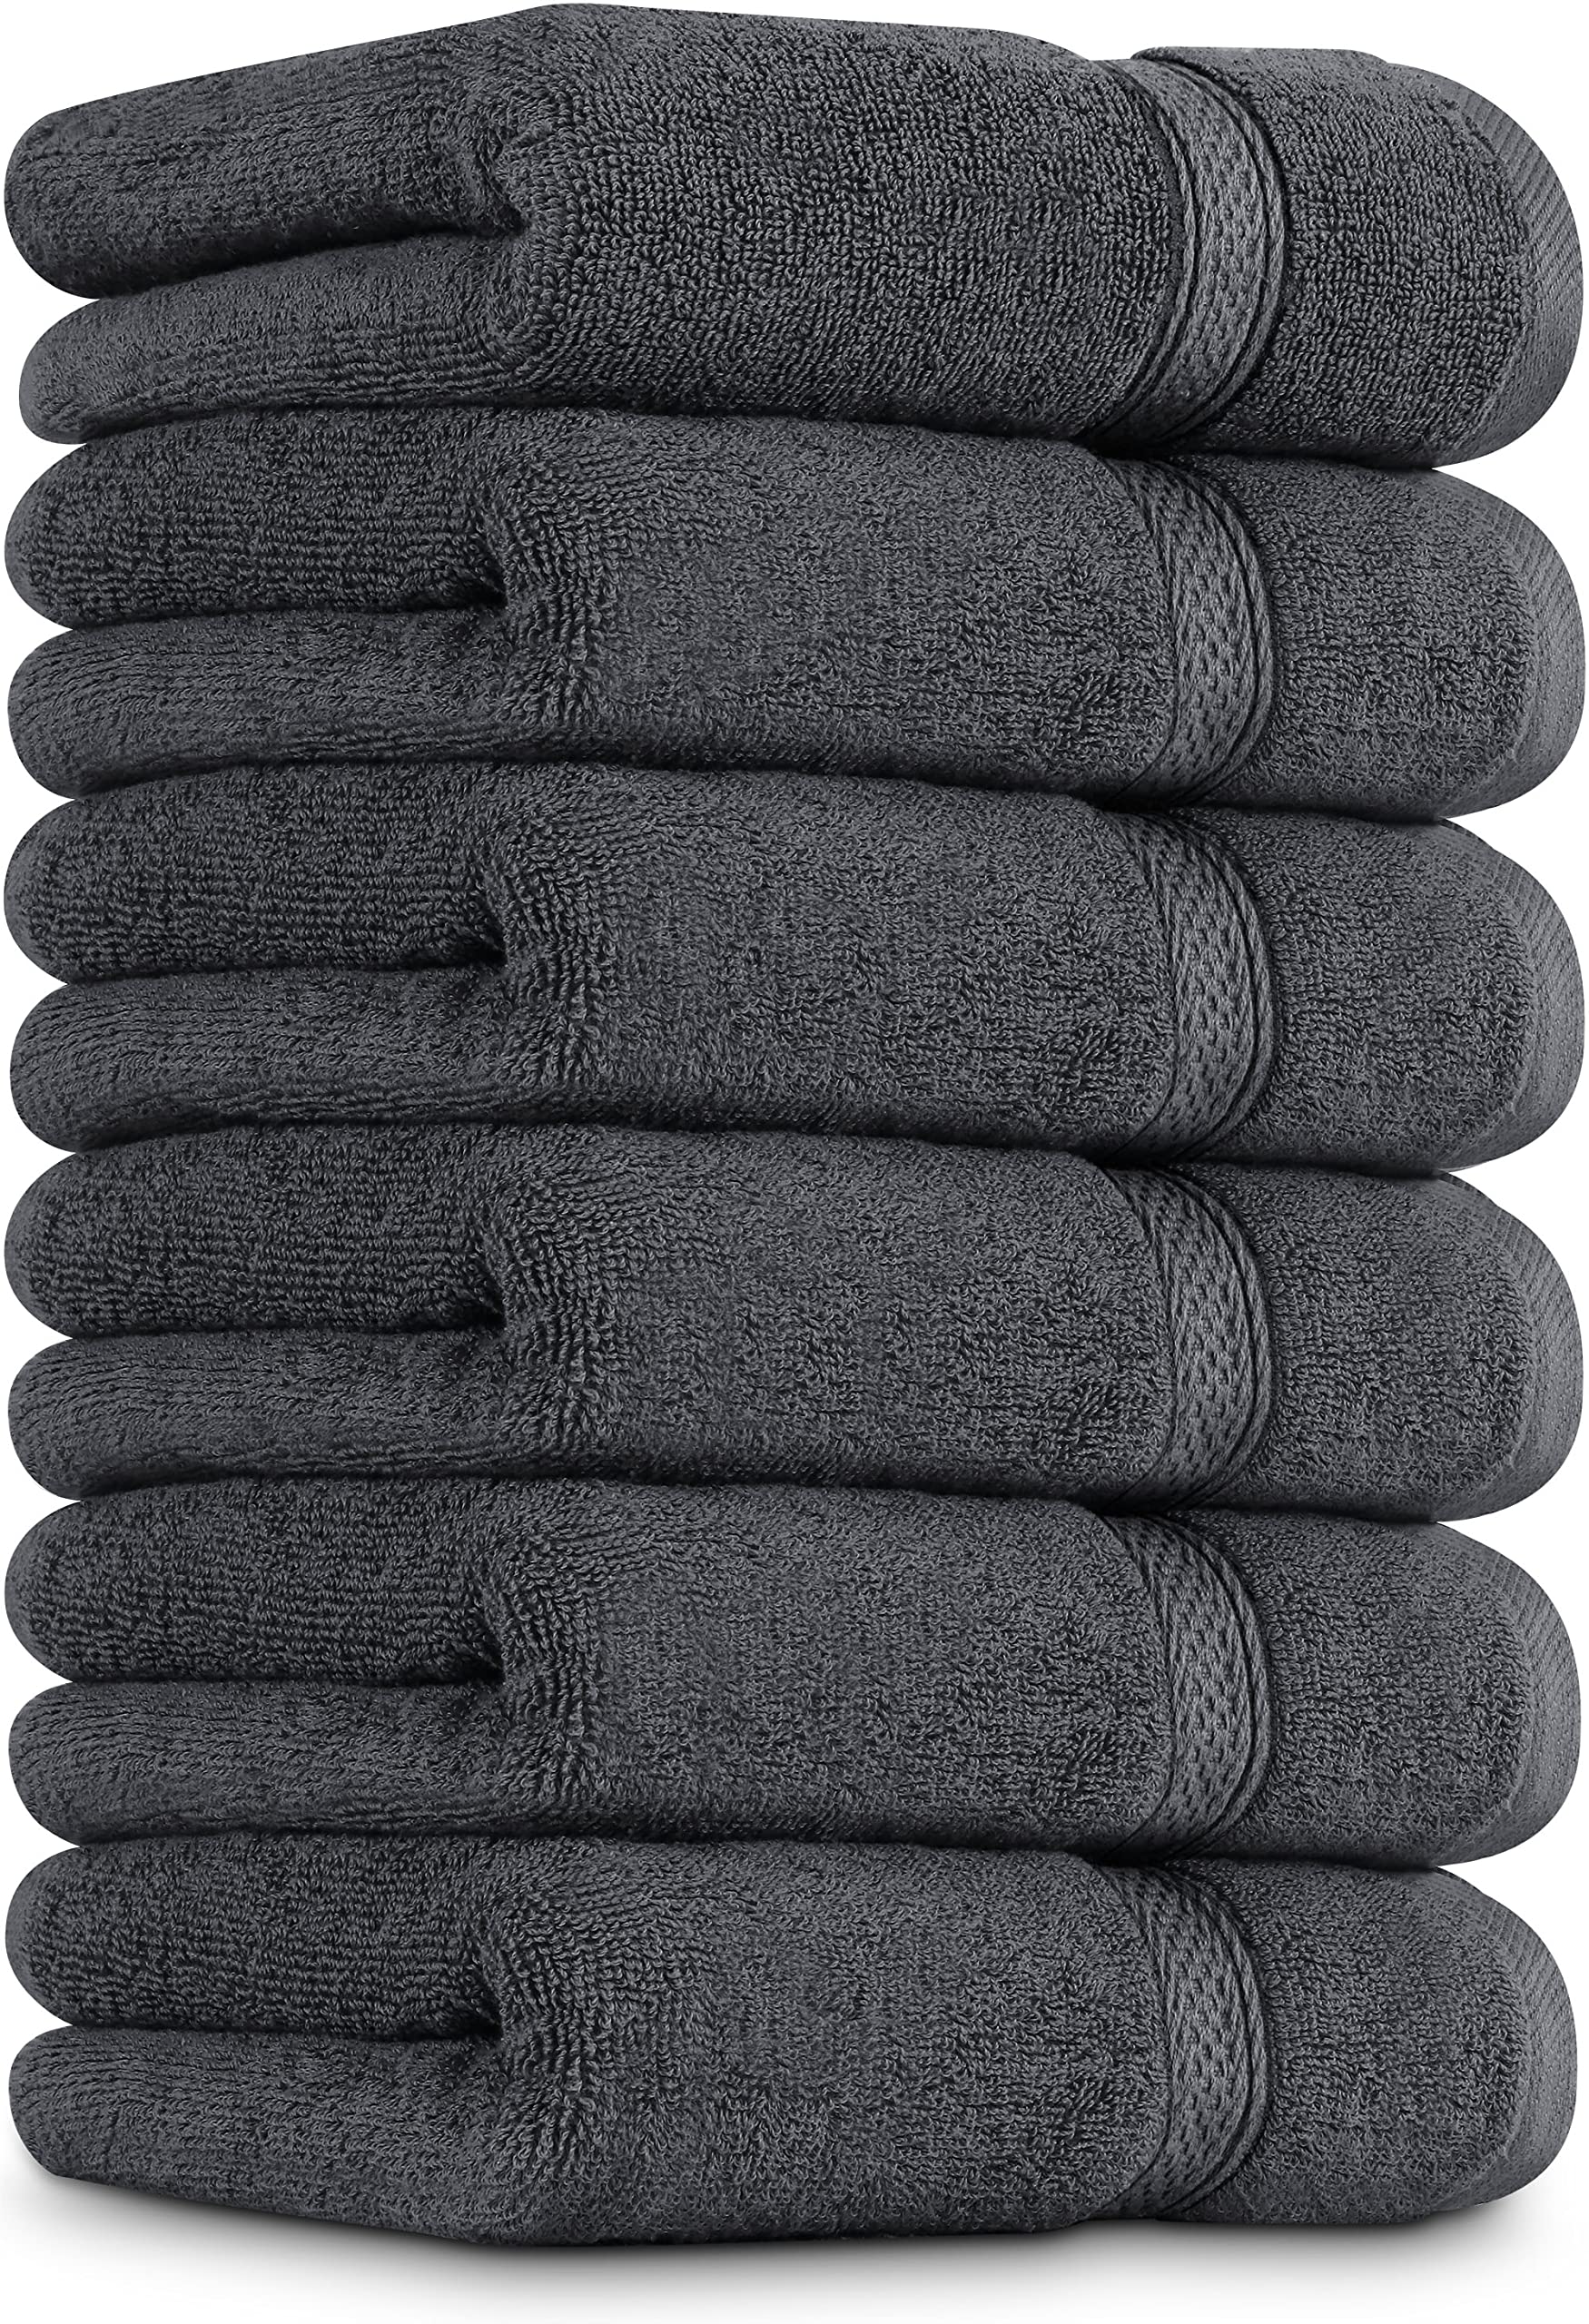 Utopia Towels 6 Pack Small Bath Towel Set, 100% Ring Spun Cotton (22 x 44  Inches) Lightweight and Highly Absorbent Quick Drying Towels, Premium  Towels